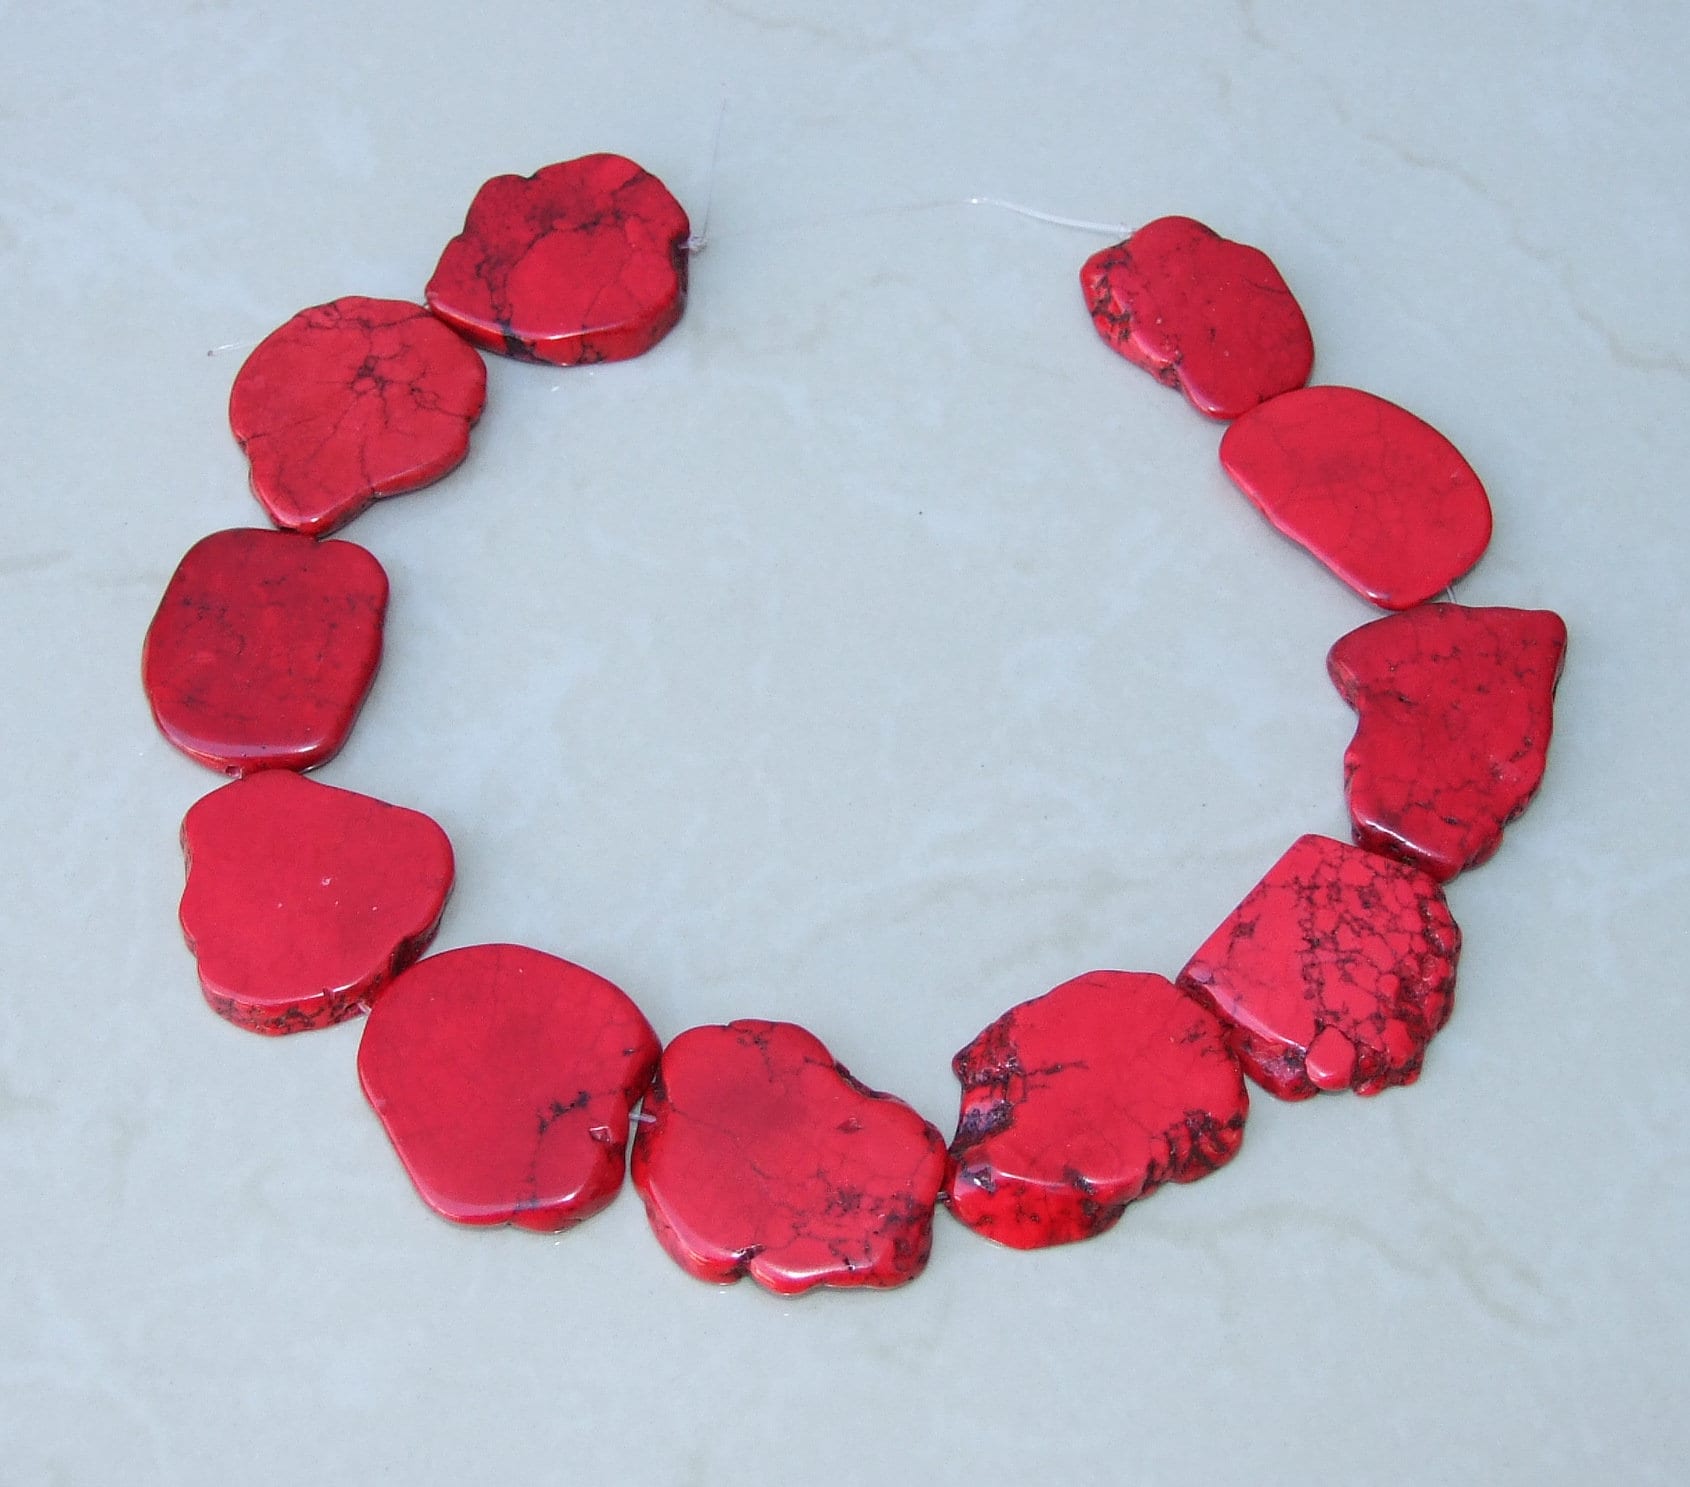 Red Magnesite Beads, Magnesite Nuggets Beads Slabs, Howlite Beads, Slab Gemstones, Howlite Necklace, Loose Stones, Slabs - 30mm to 40mm